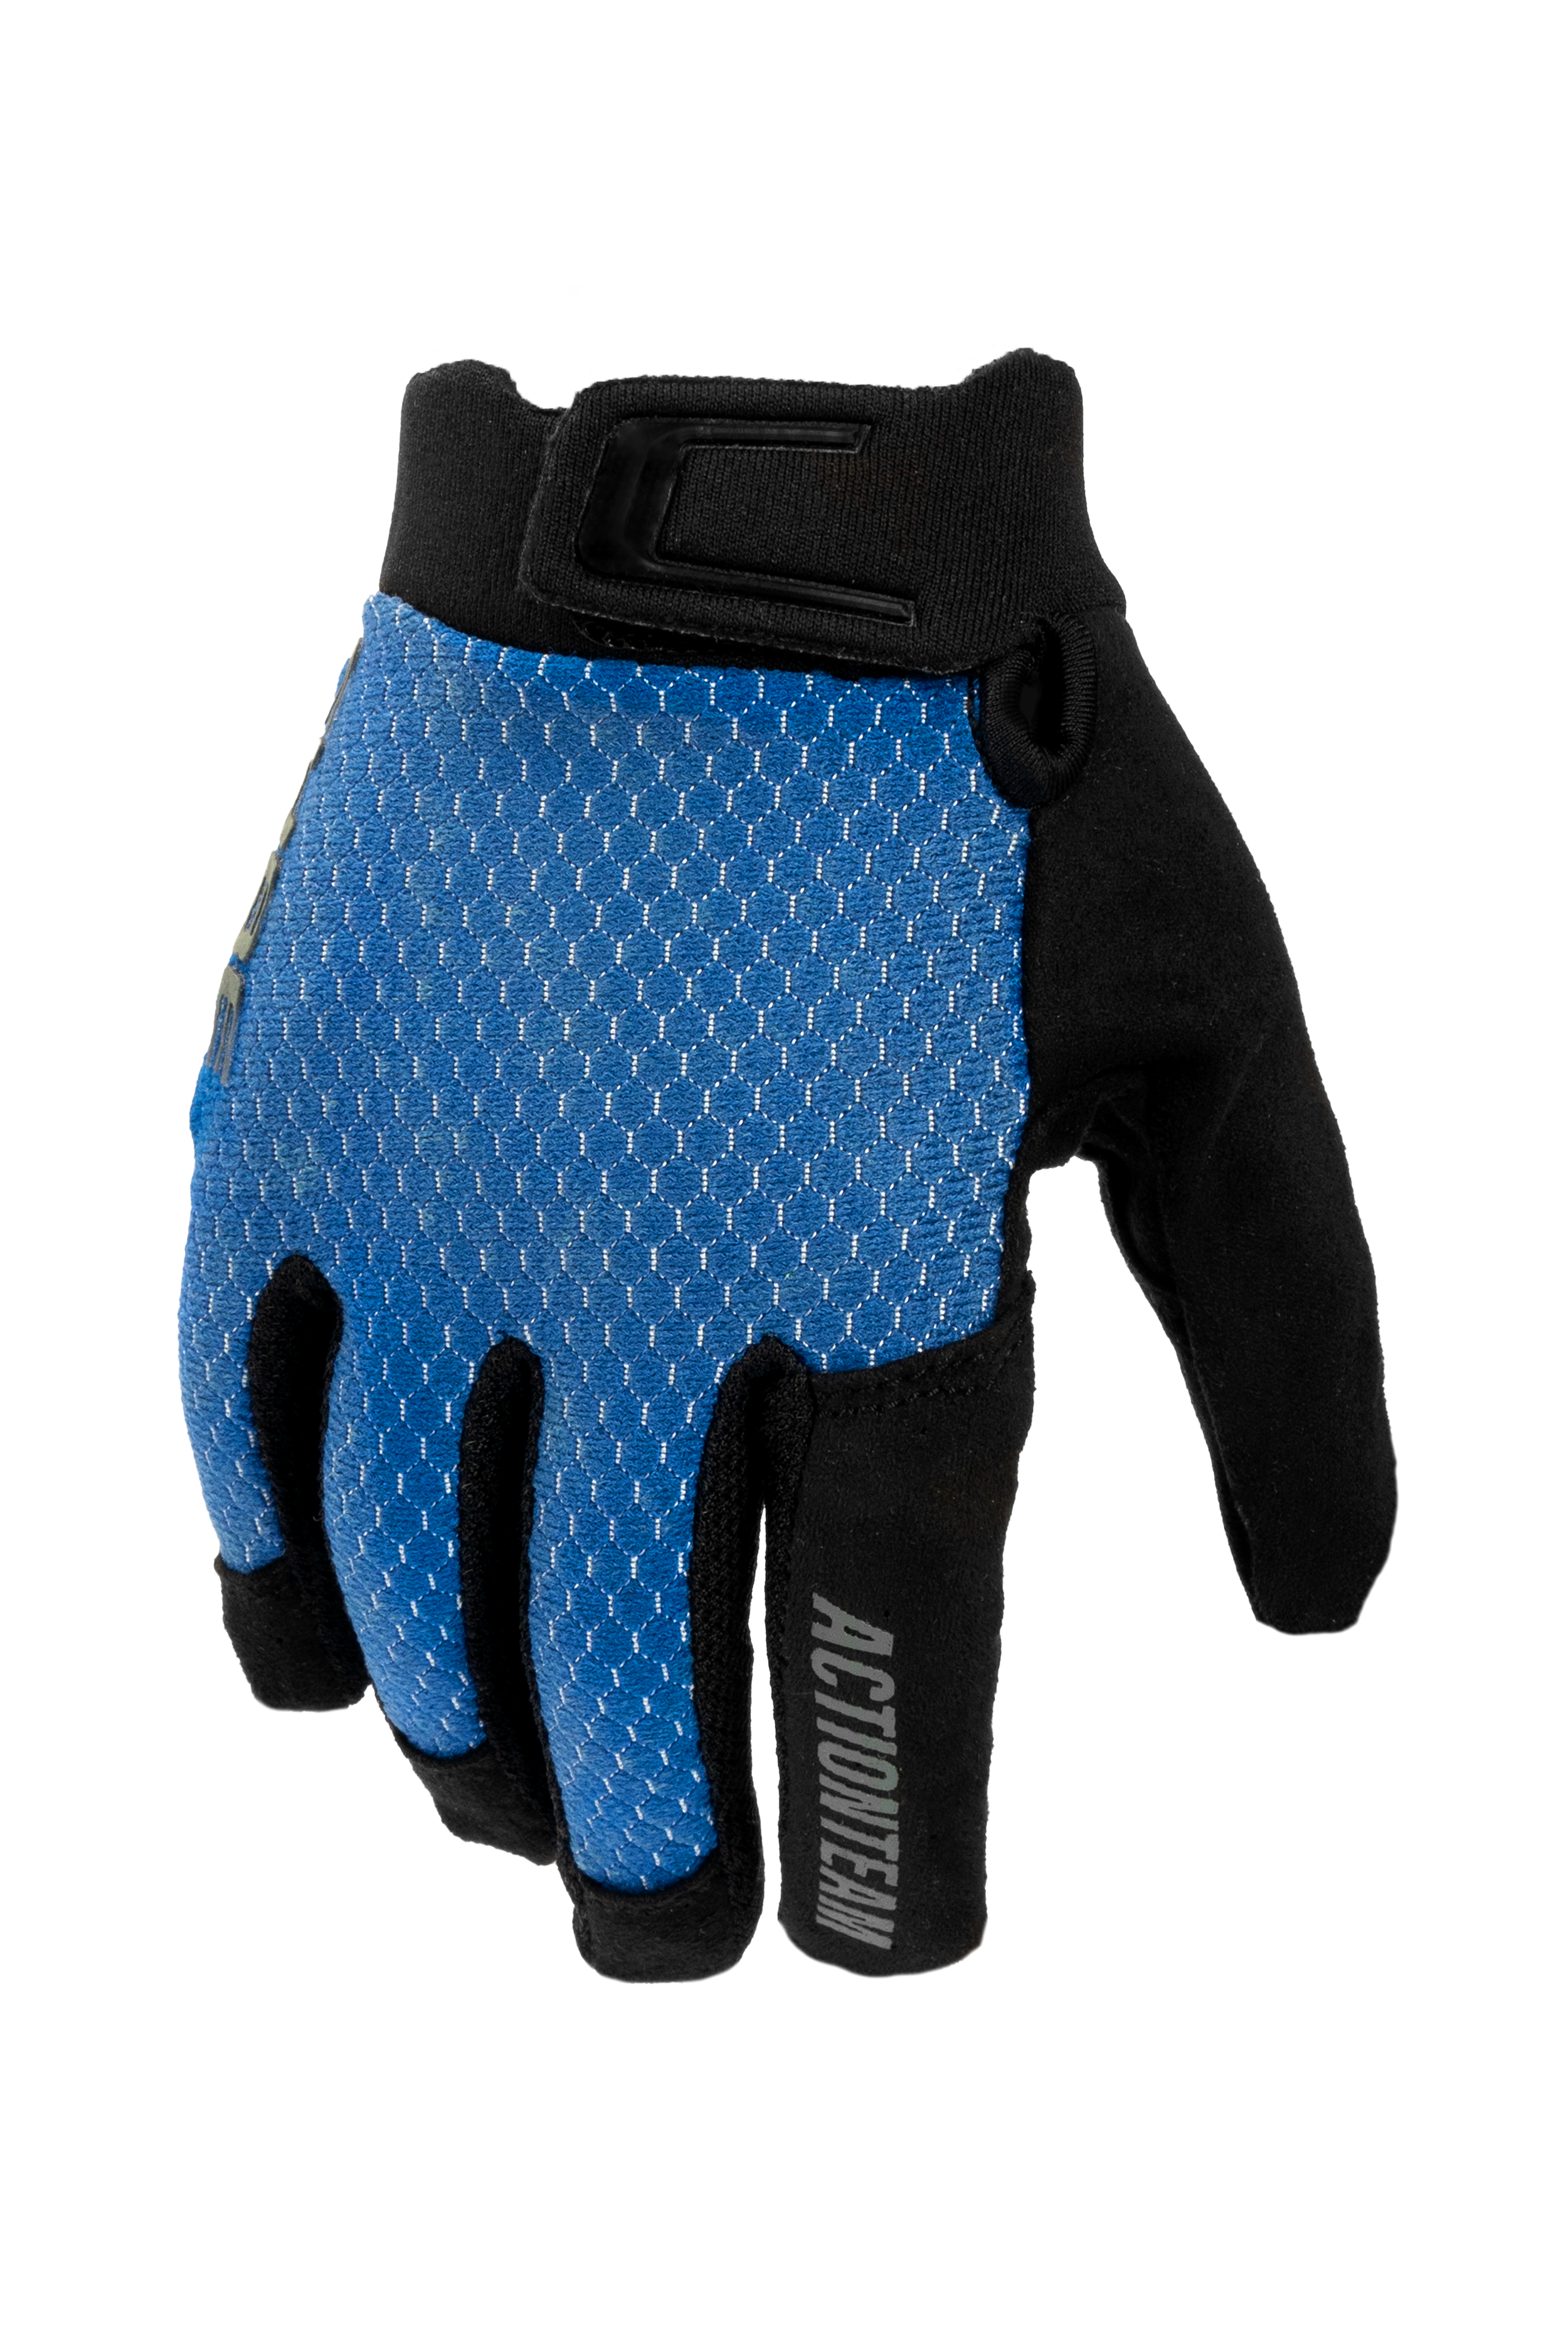 CUBE Gloves ROOKIE long finger X Actionteam